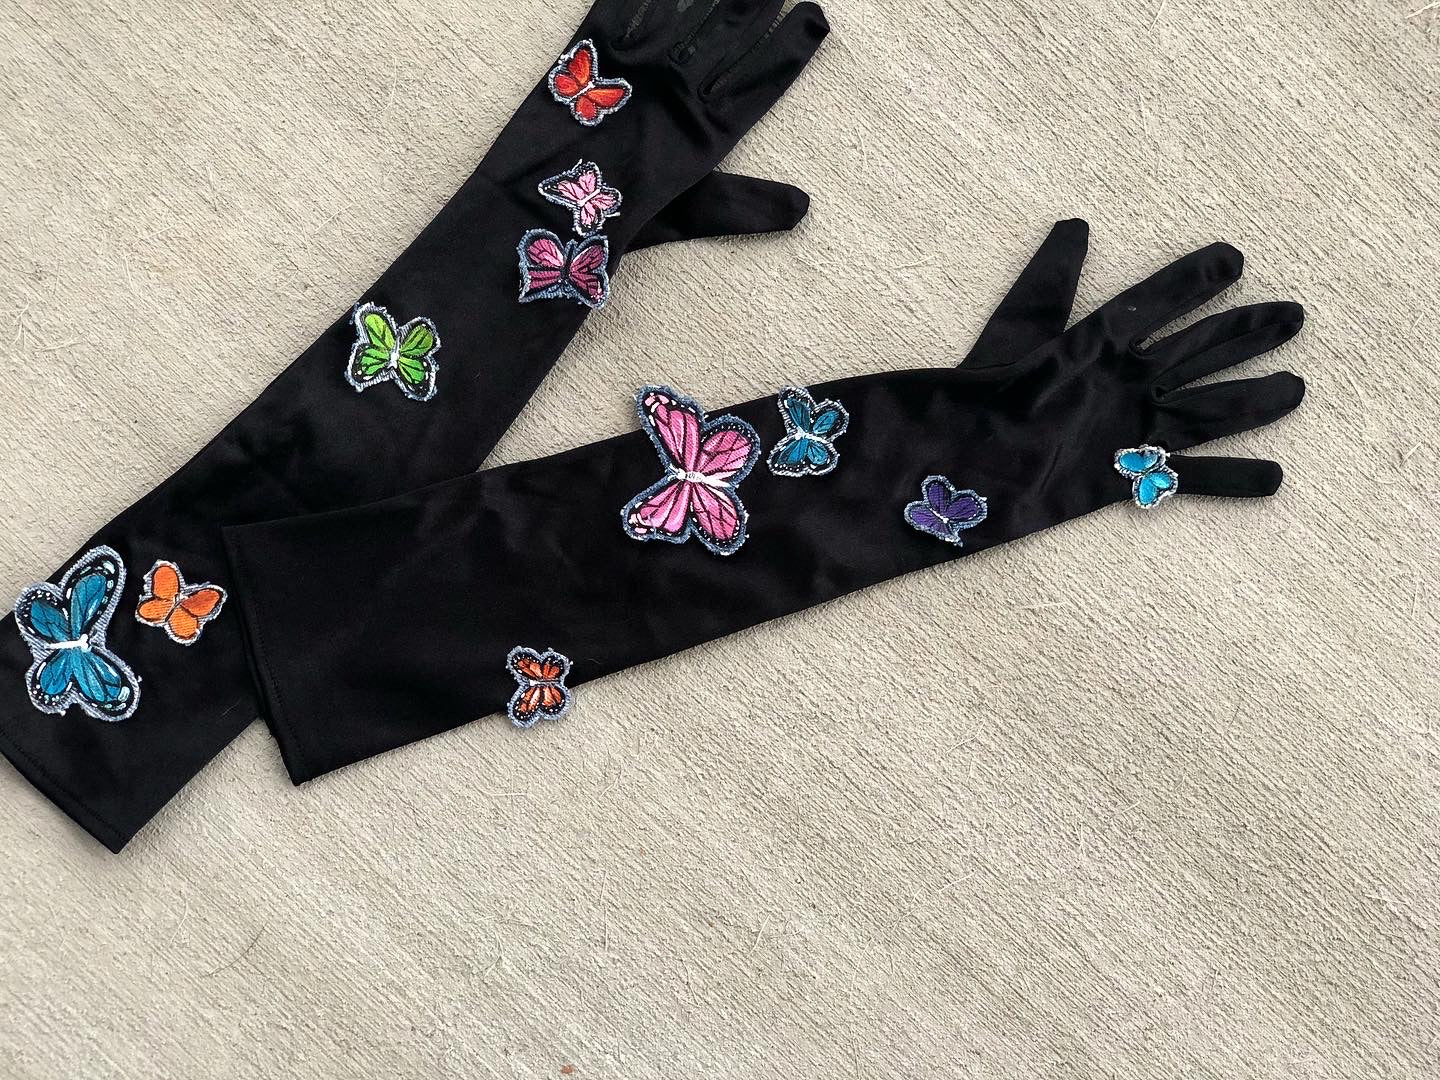 Butterfly gloves